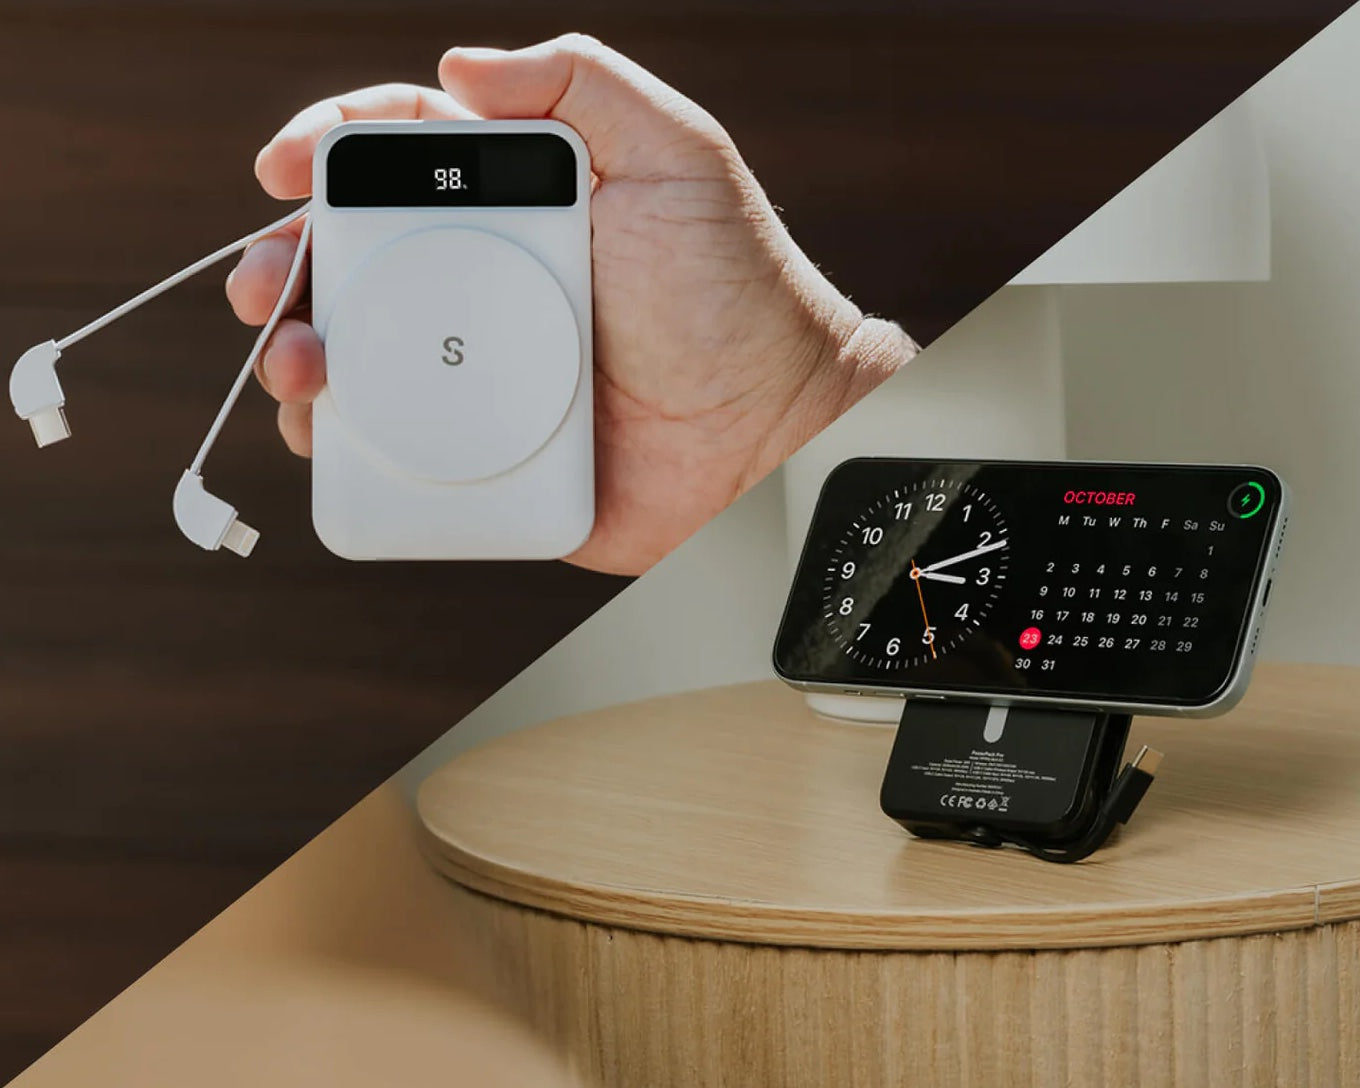 7 Device Charging Station: Wireless, USB, Power Bank